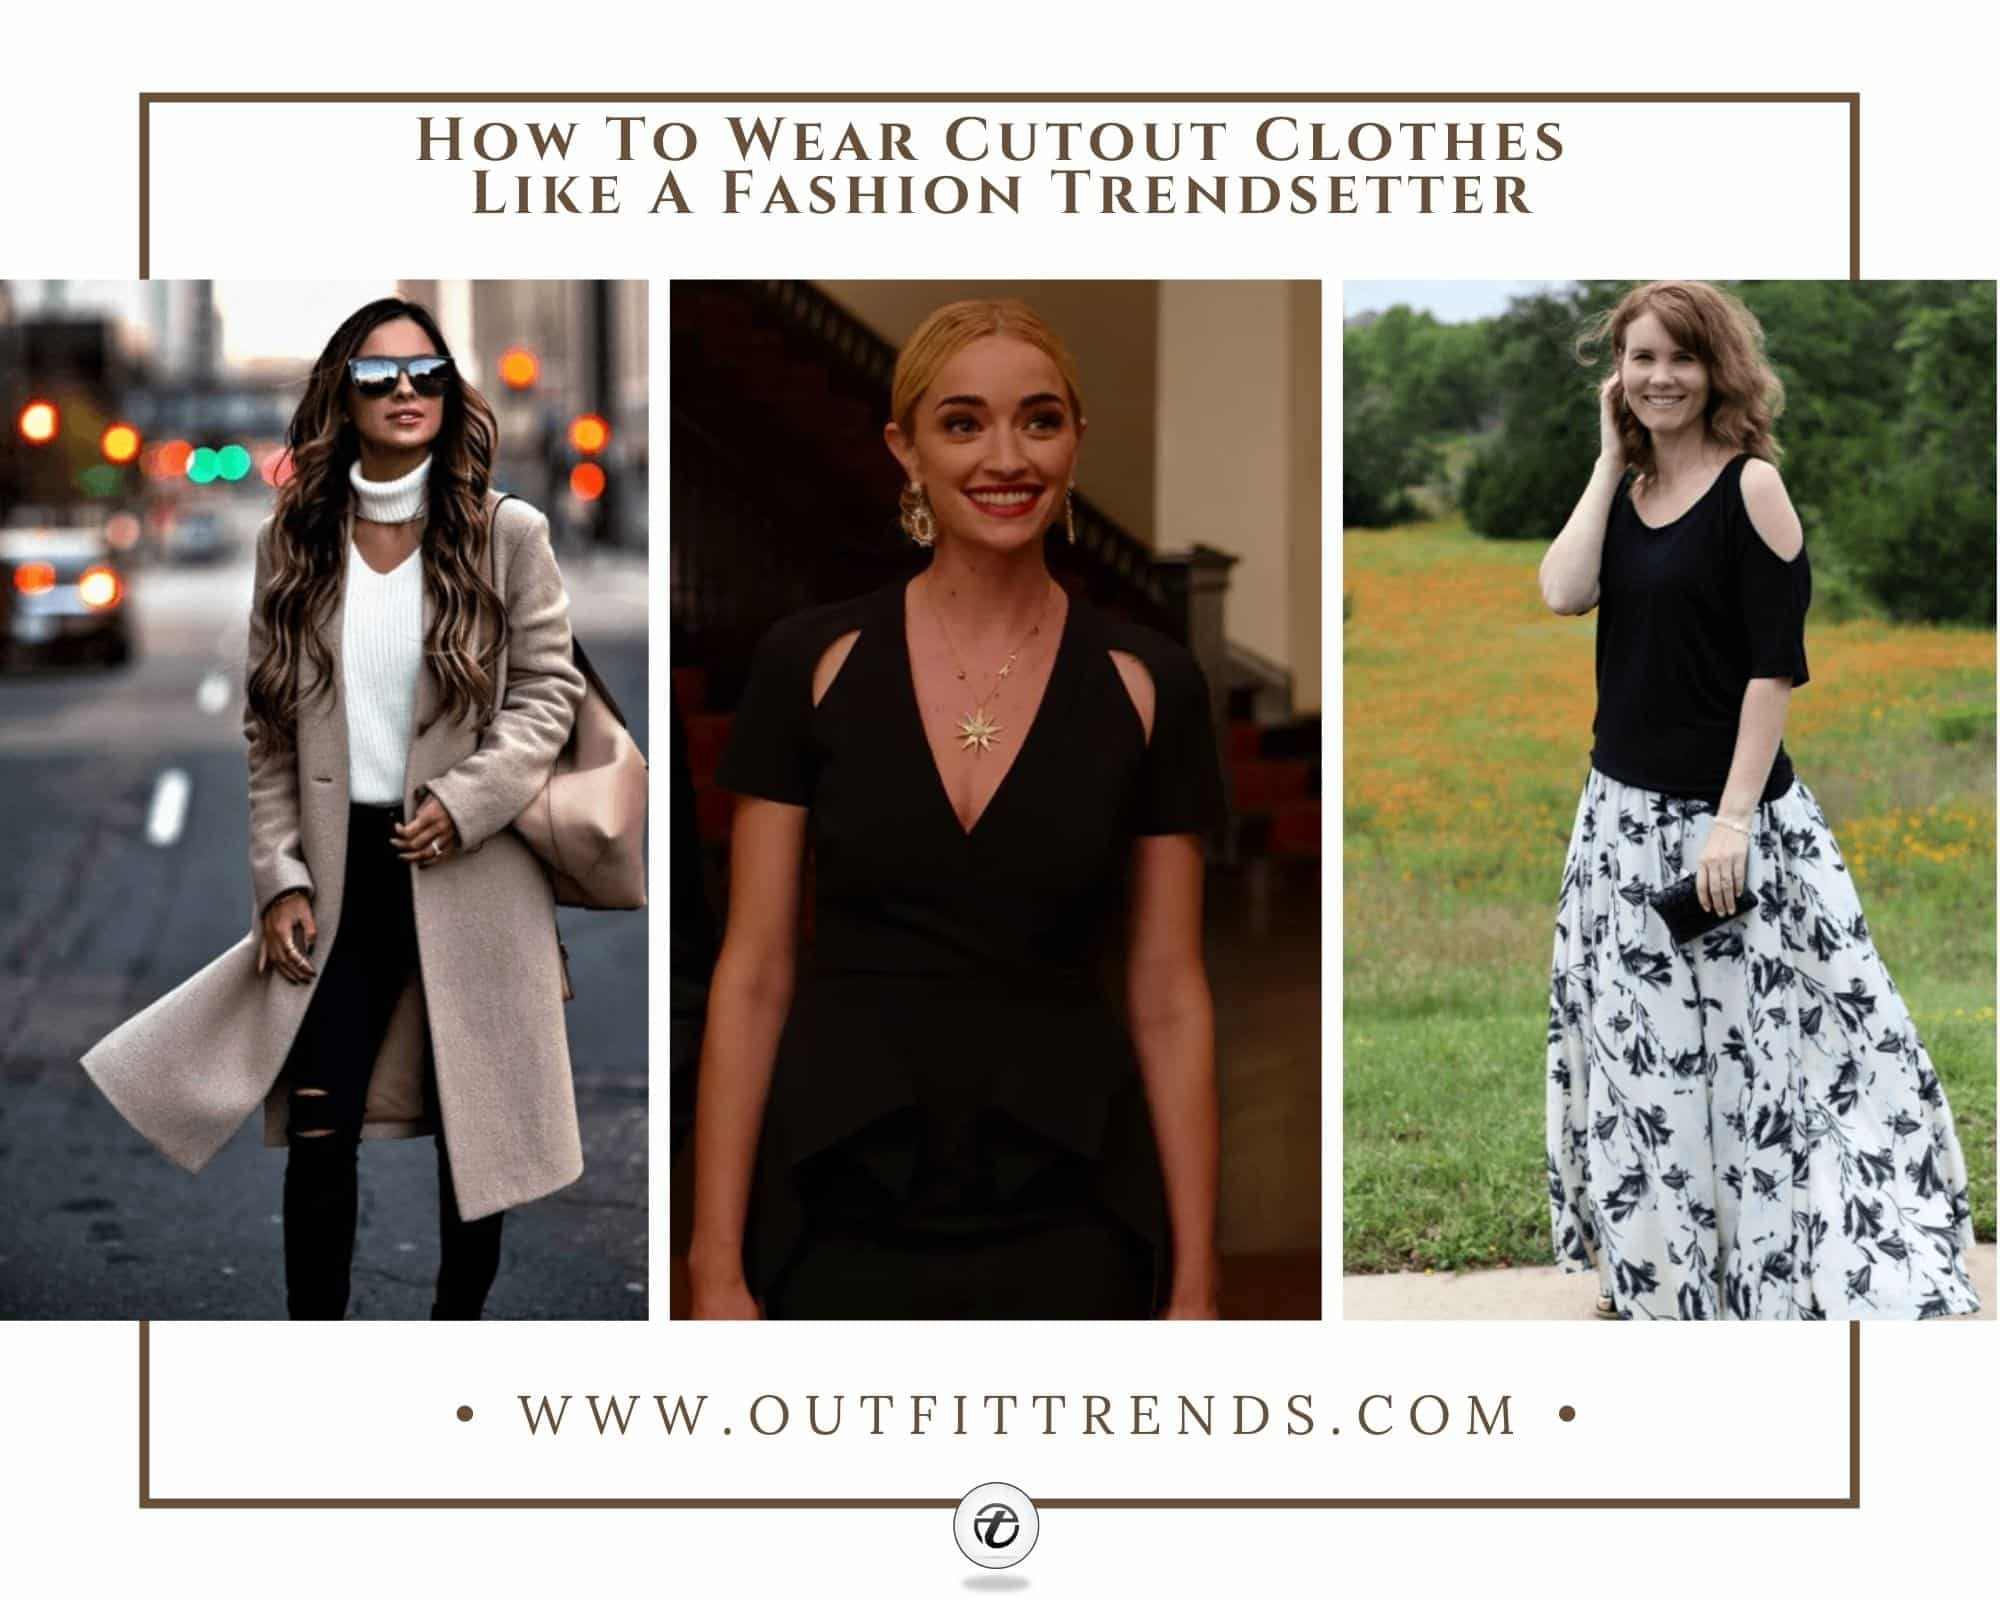 21 Best Cutout Dresses 2021 & Tips How to wear Cutout Clothes